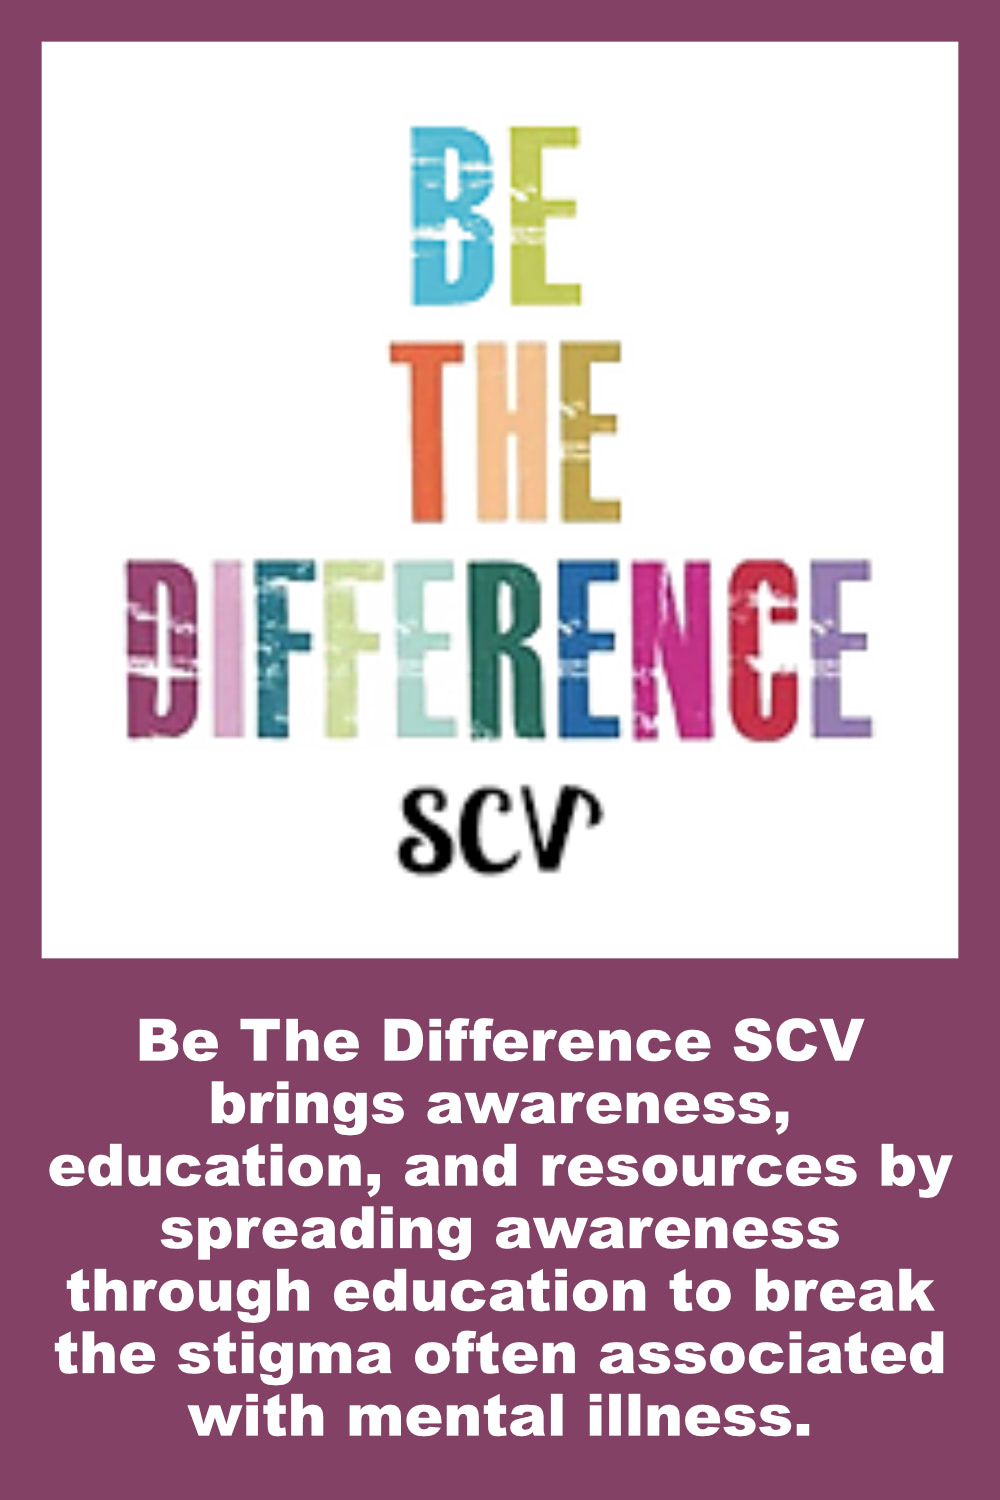 Be The Difference SCV brings awareness, education, and resources by spreading awareness through education to break the stigma often associated with mental illness.